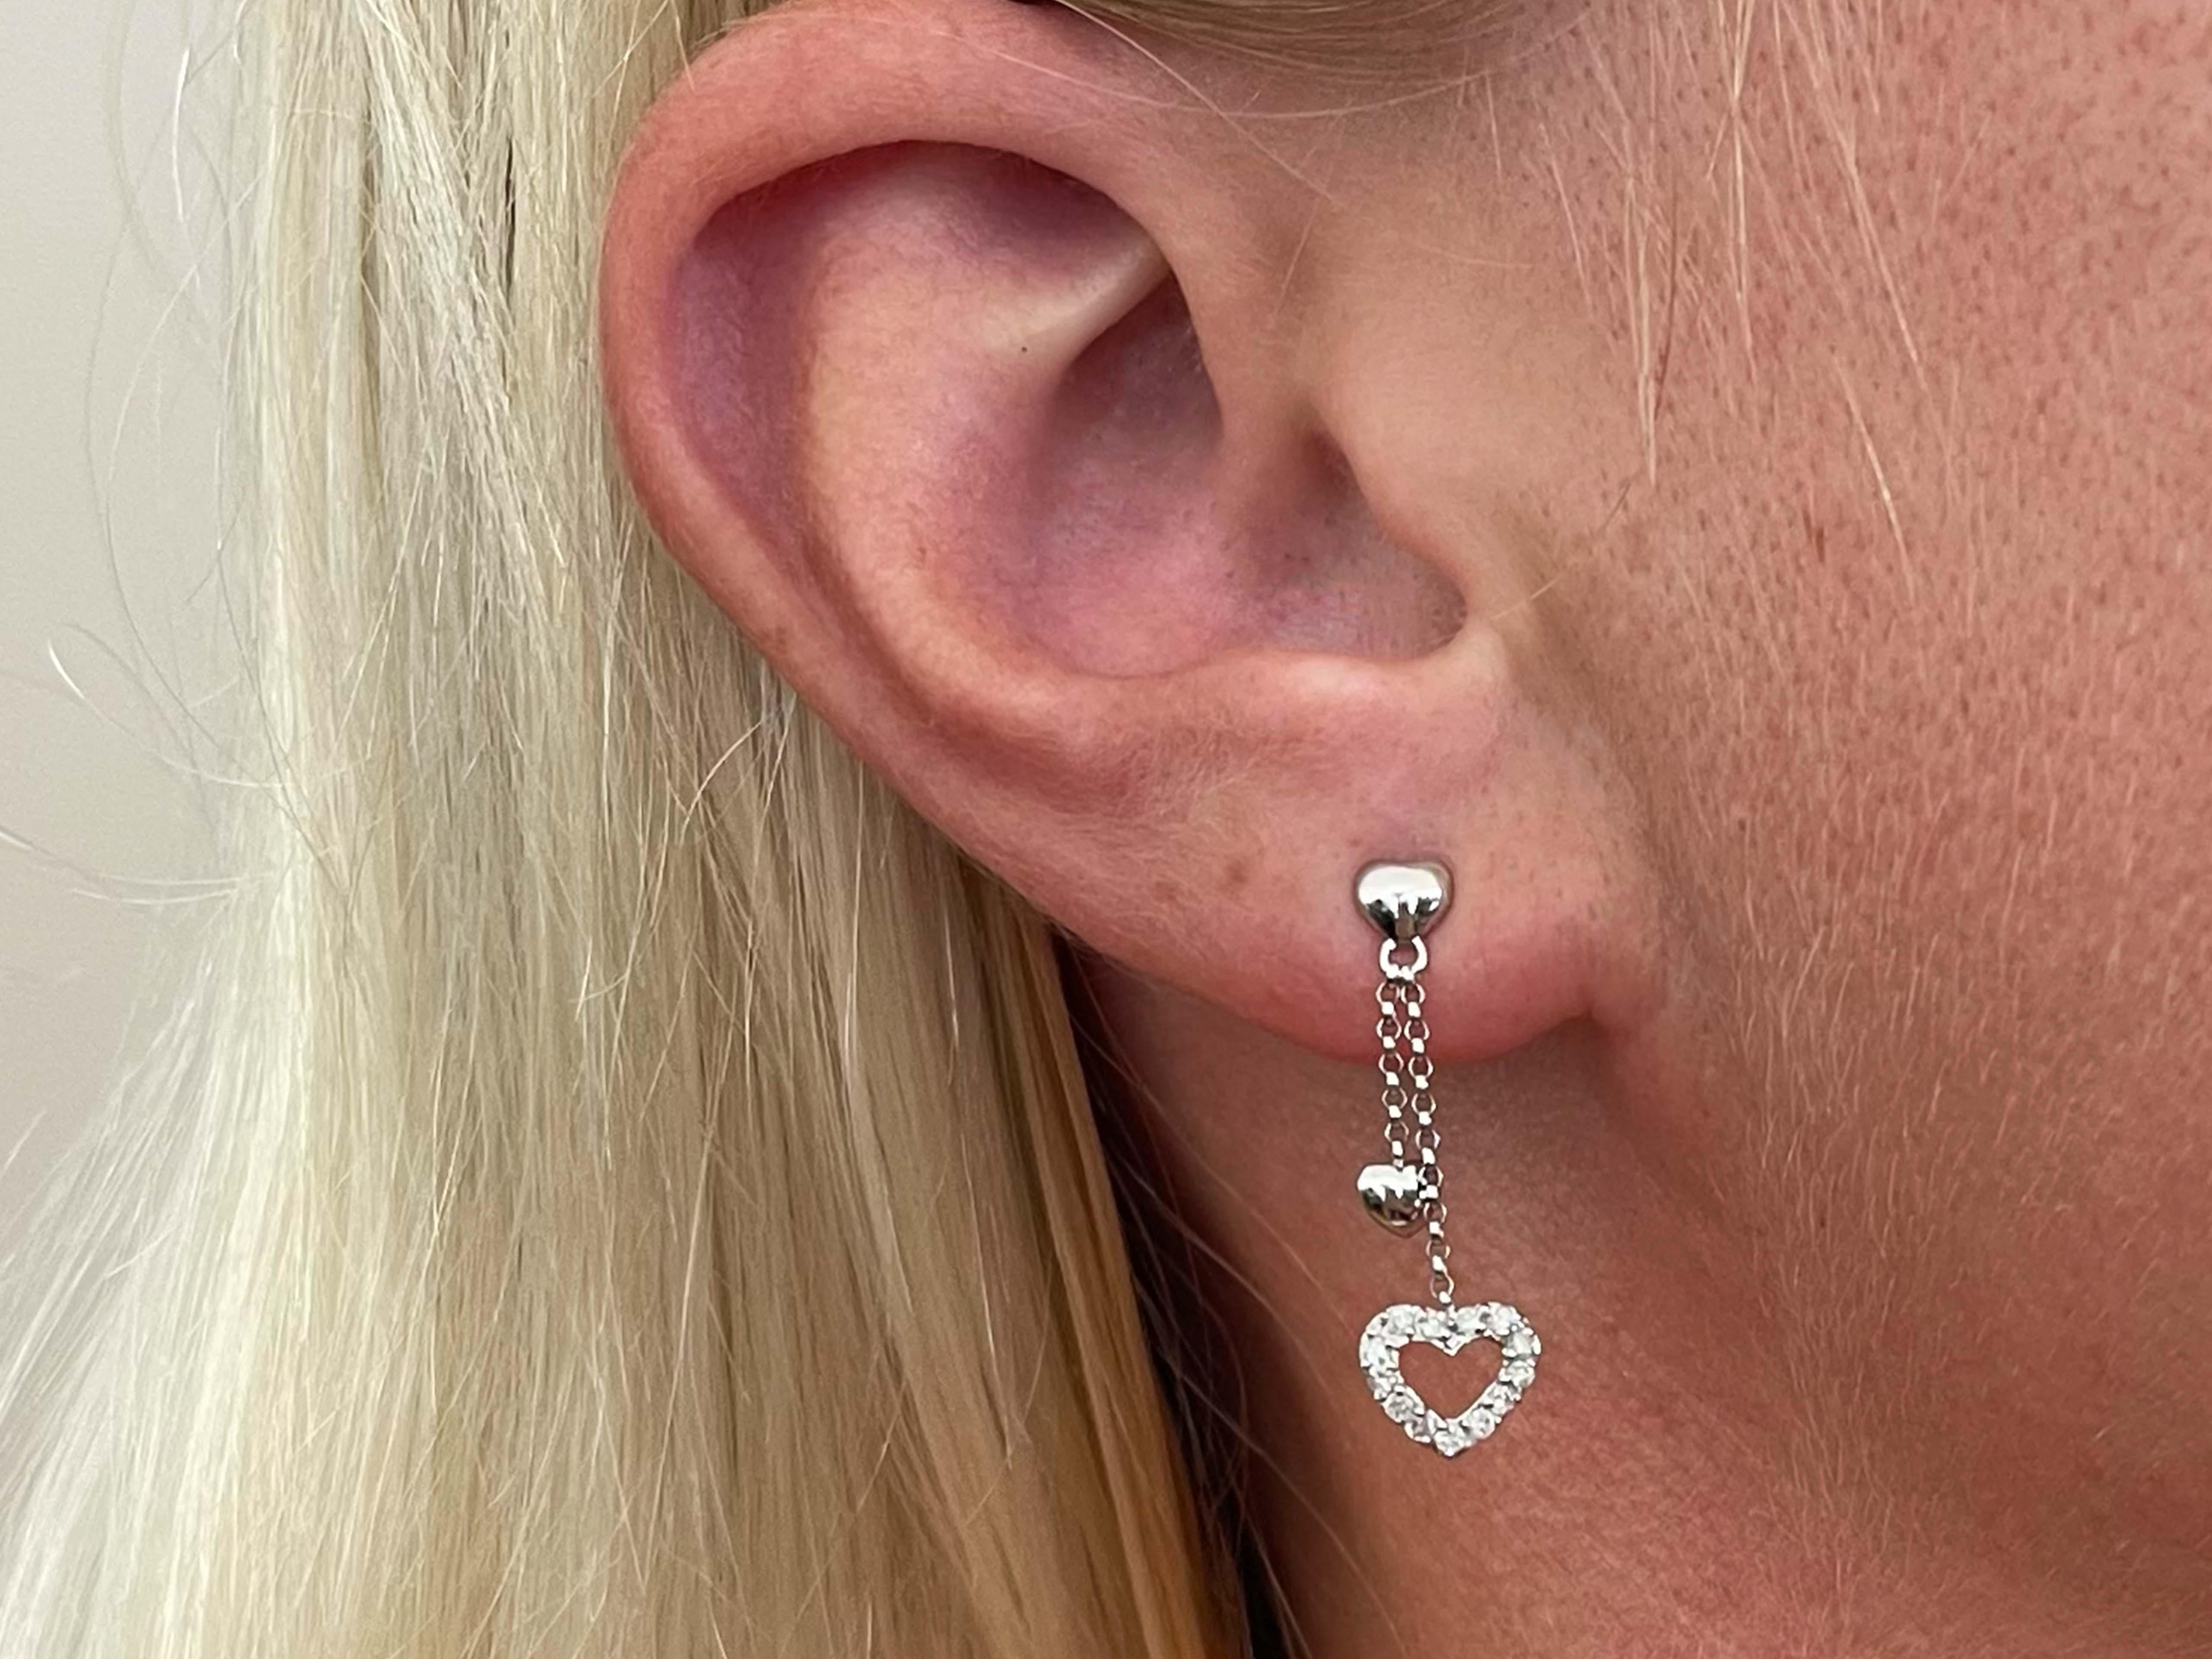 Earrings Specifications:

Metal: earrings are 18K White Gold and backs are 14K white gold
Total Weight: 1.6 Grams

Diamond Count: 26

Diamond Carat Weight: ~0.20 carats

Stamped: 